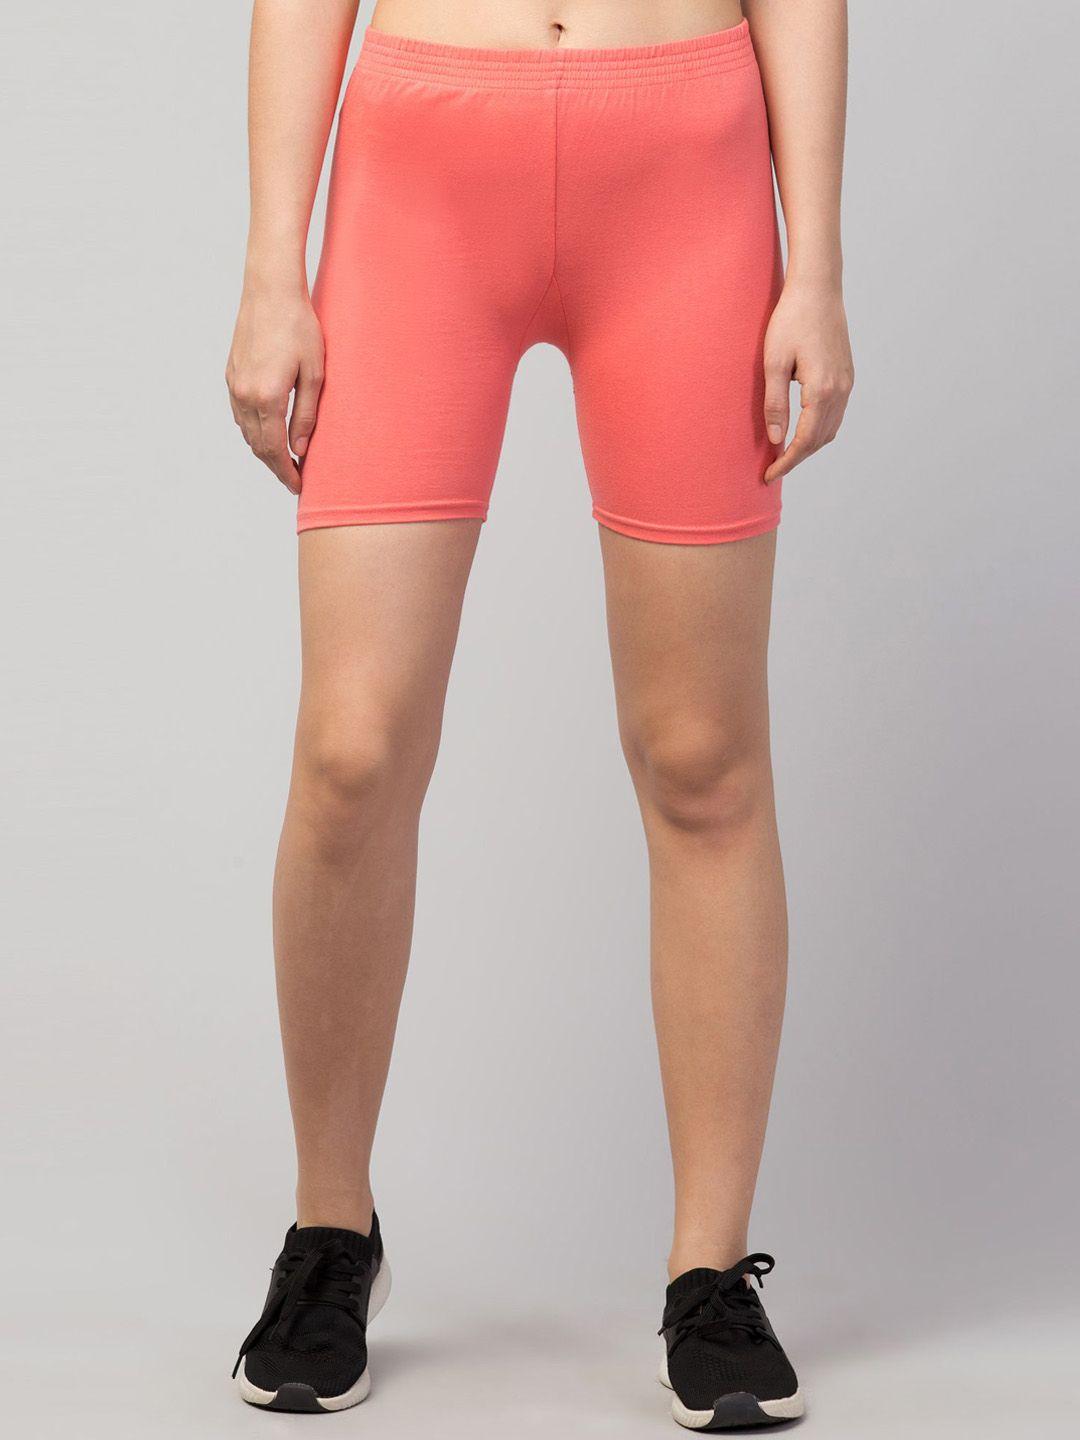 Apraa & Parma Women Coral Slim Fit Cycling Sports Shorts